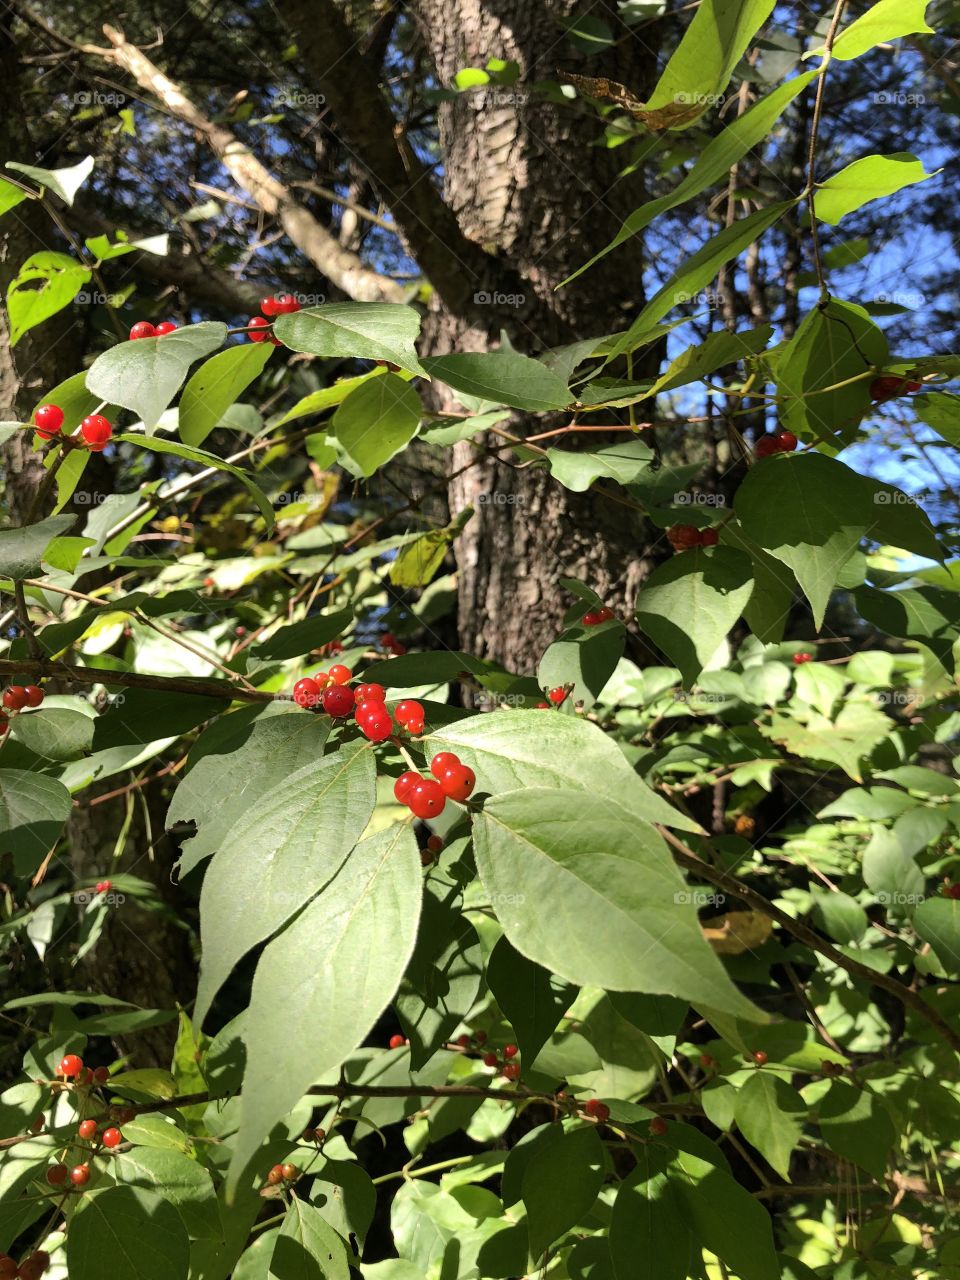 Berries on a bush in the woods